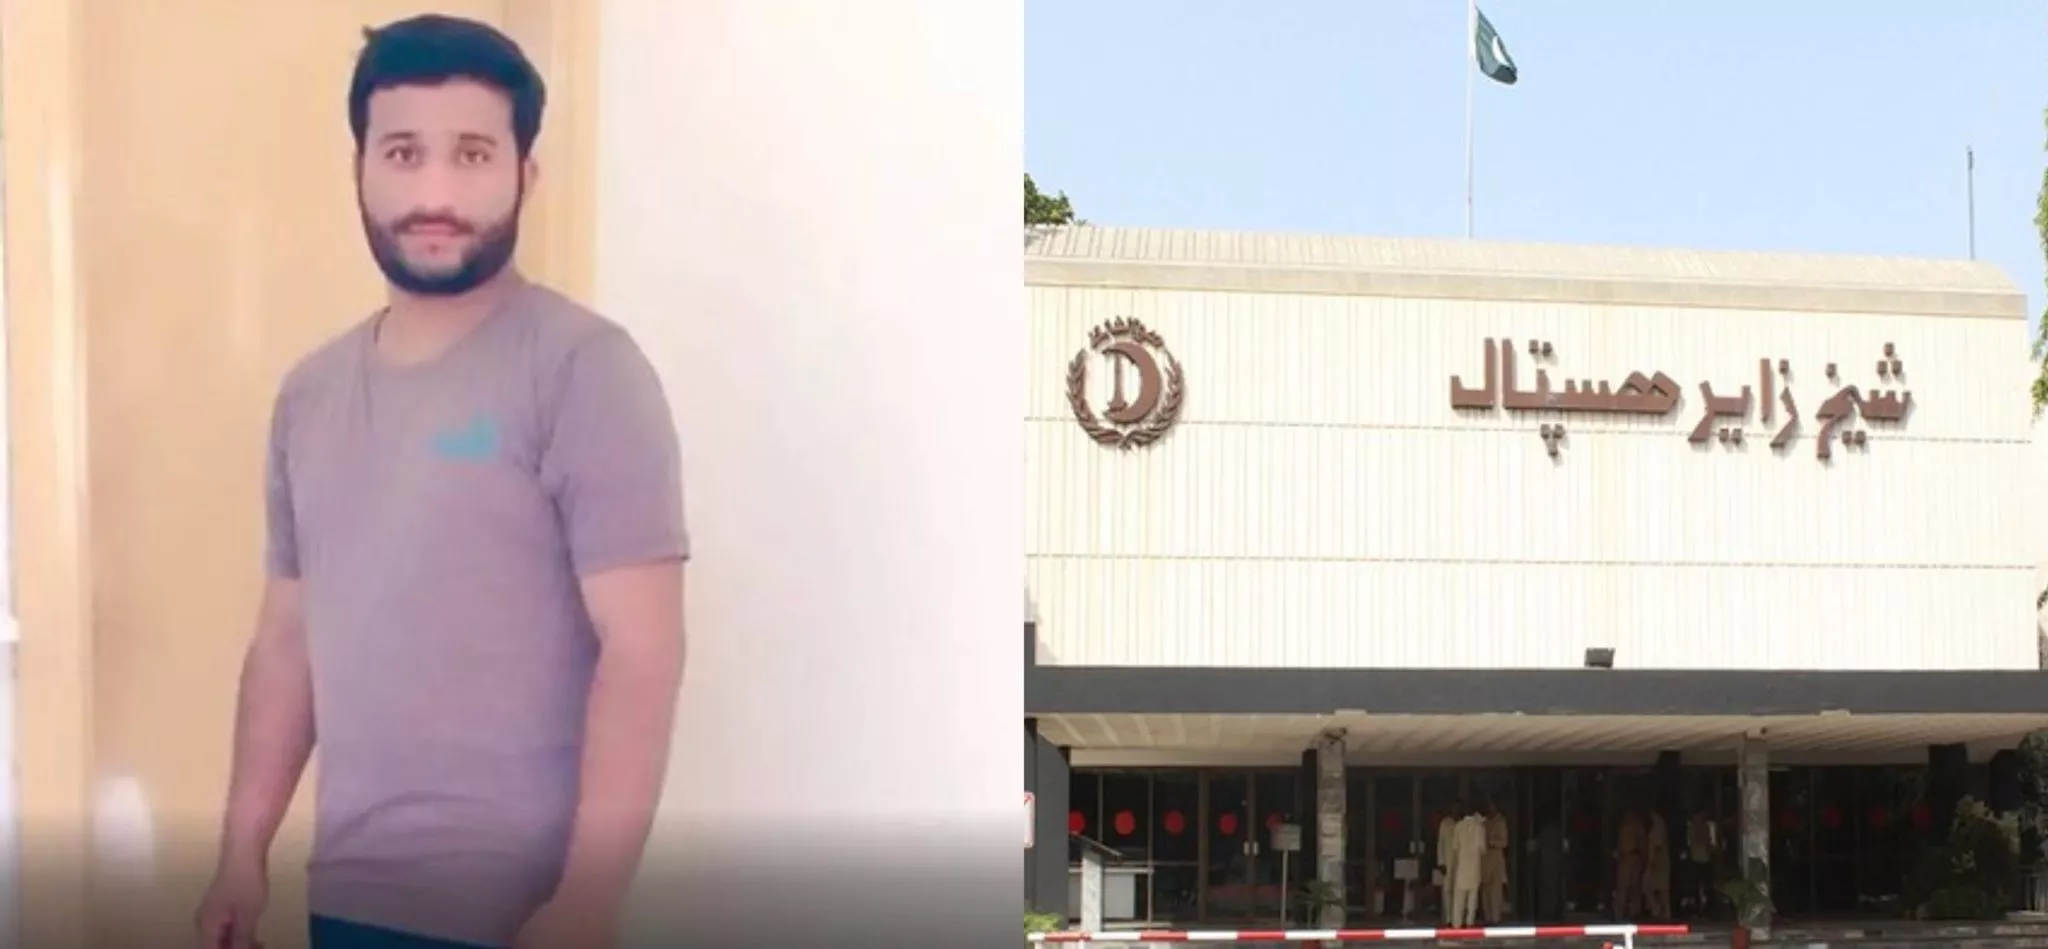 Umer Farooq Bajwa Son Died After Donating Liver